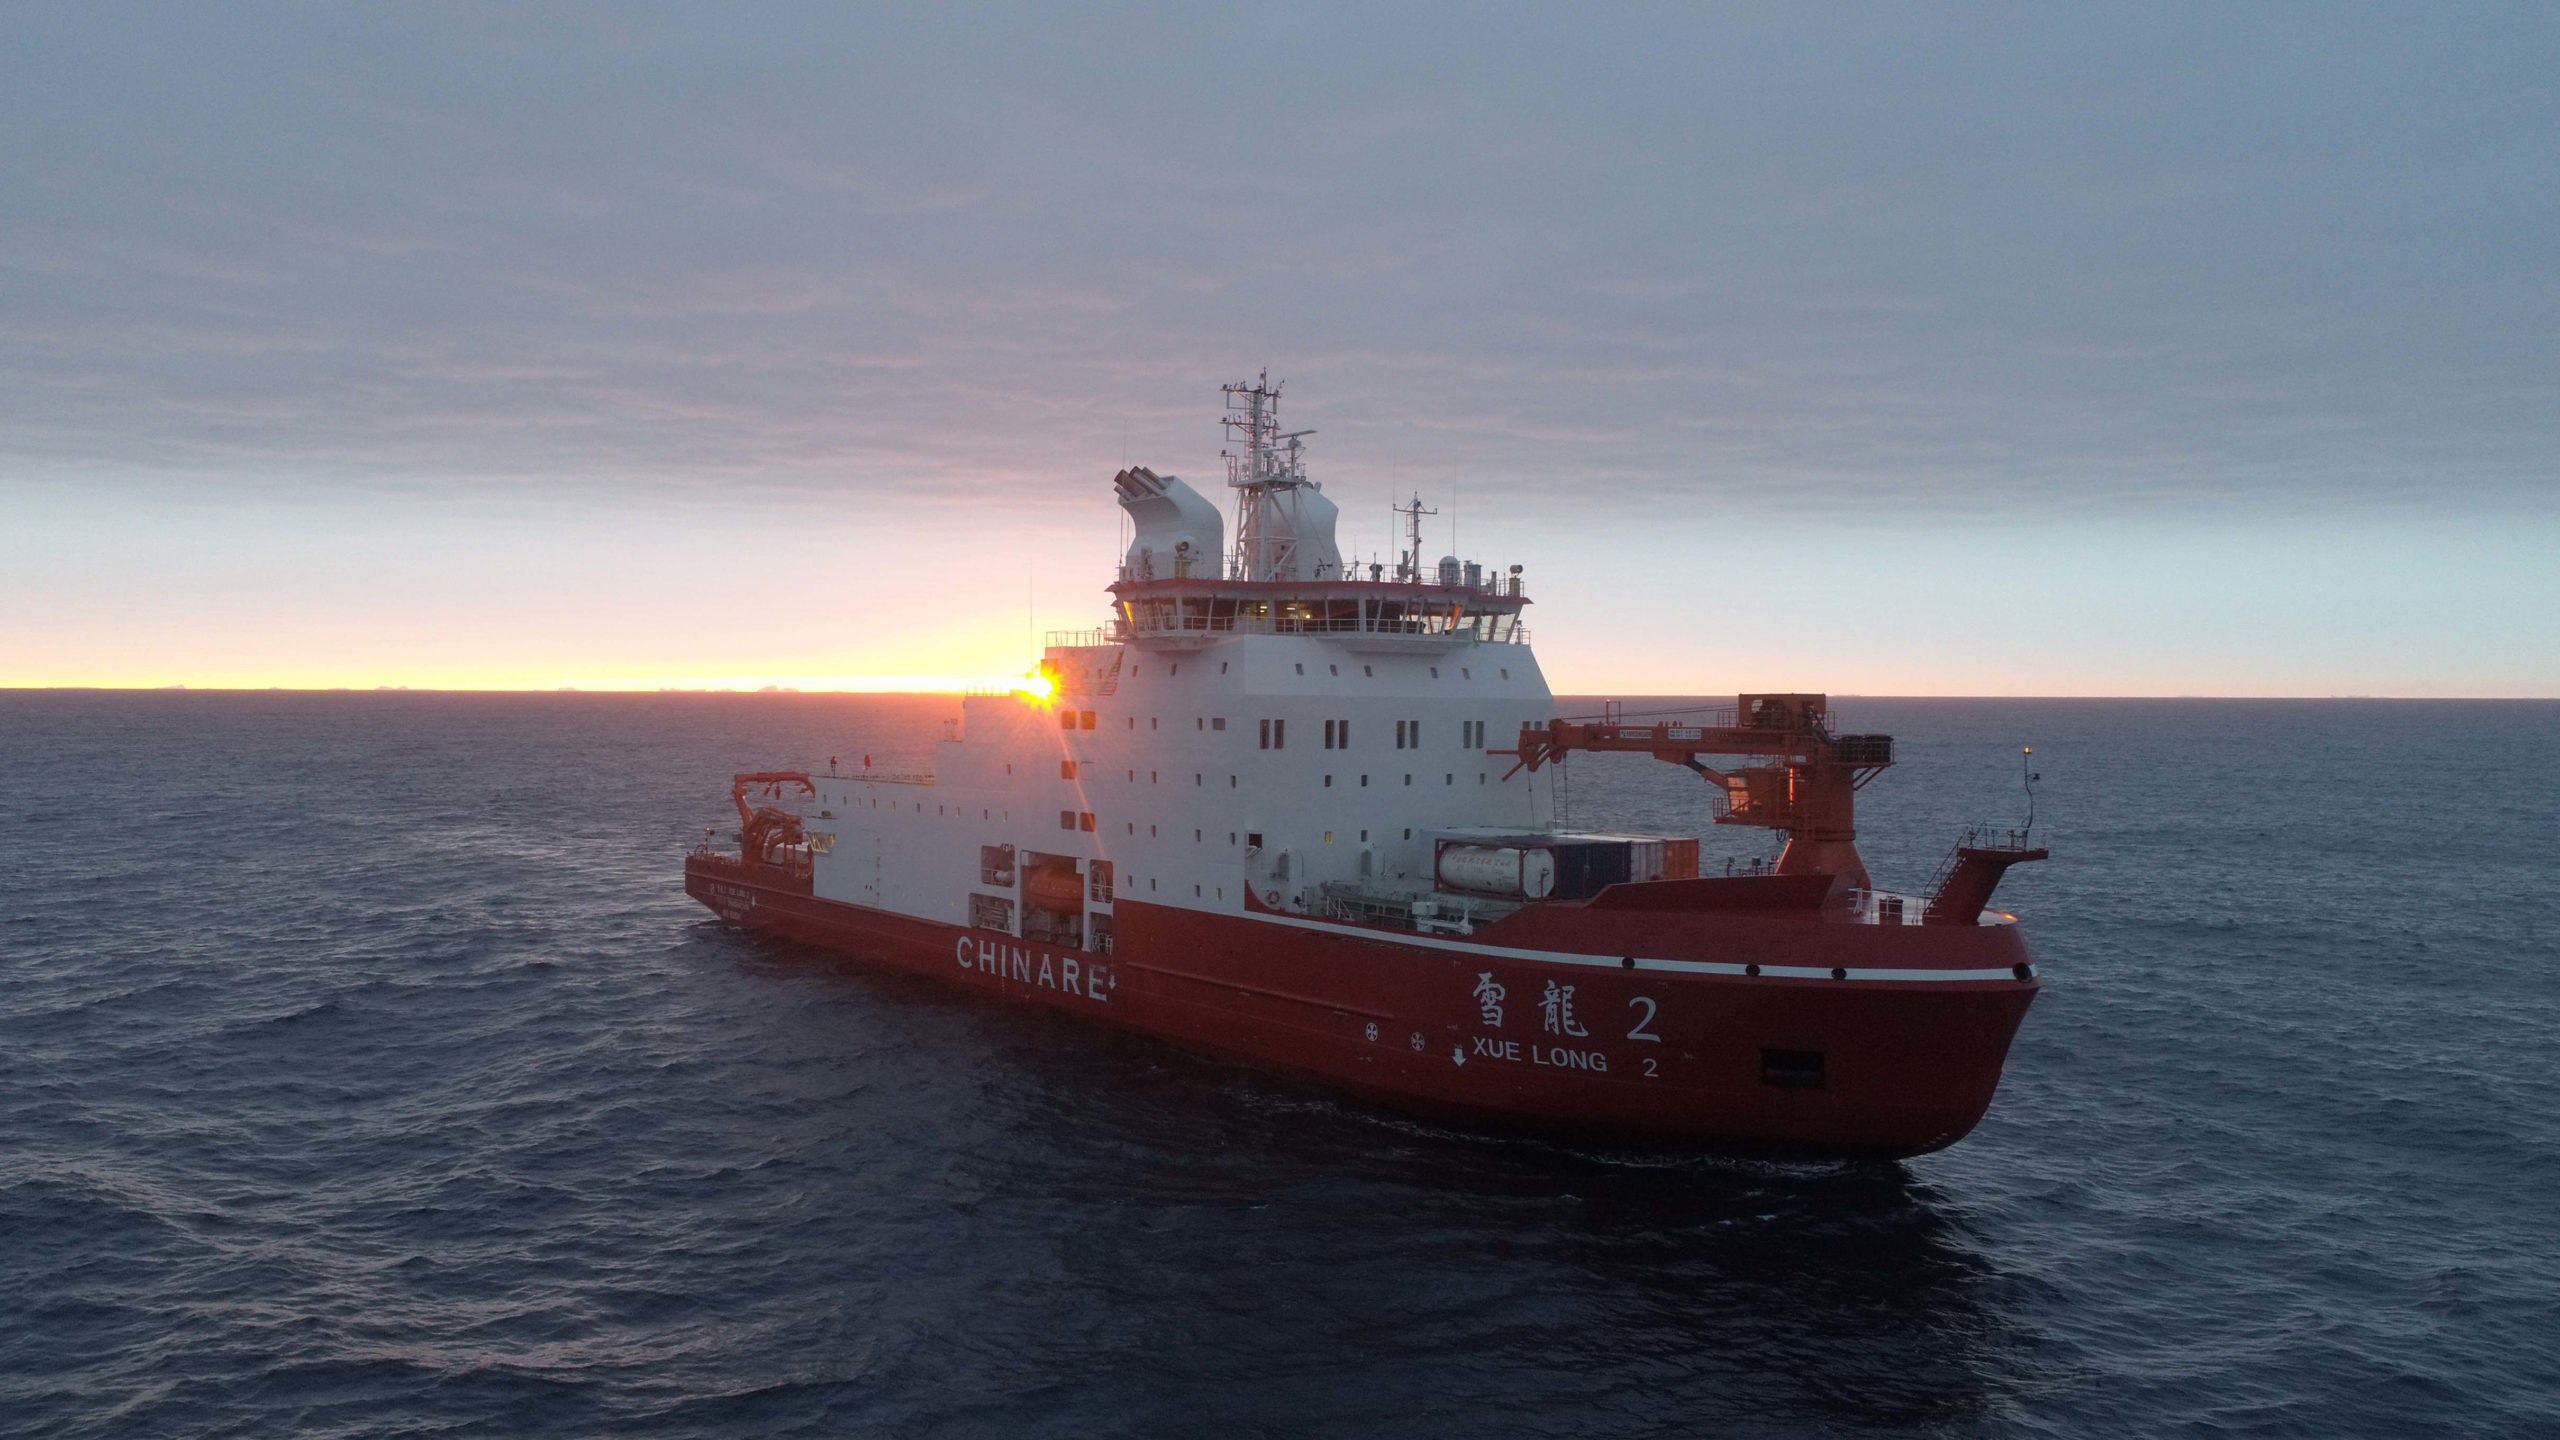 China&#039;s new icebreaker sets course for its first Arctic voyage - ArcticToday